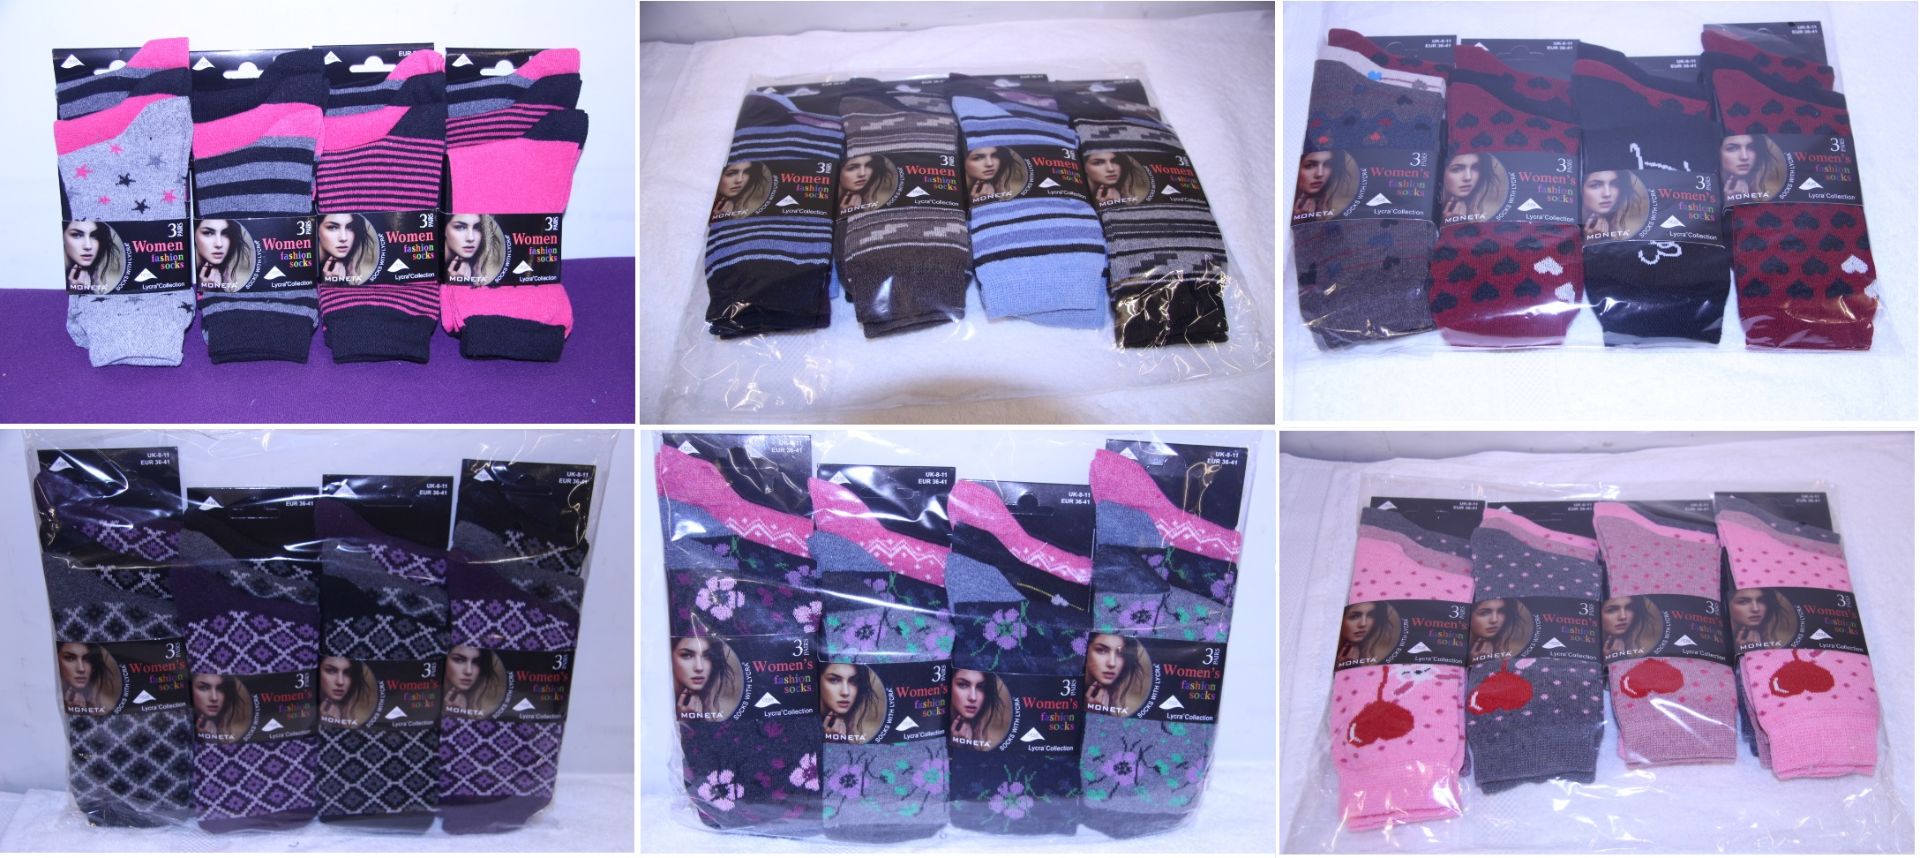 V *TRADE QTY* Brand New A Lot of Twelve Pairs Ladies Fashion Socks (Designs May Vary) - ISP £16. - Image 2 of 3